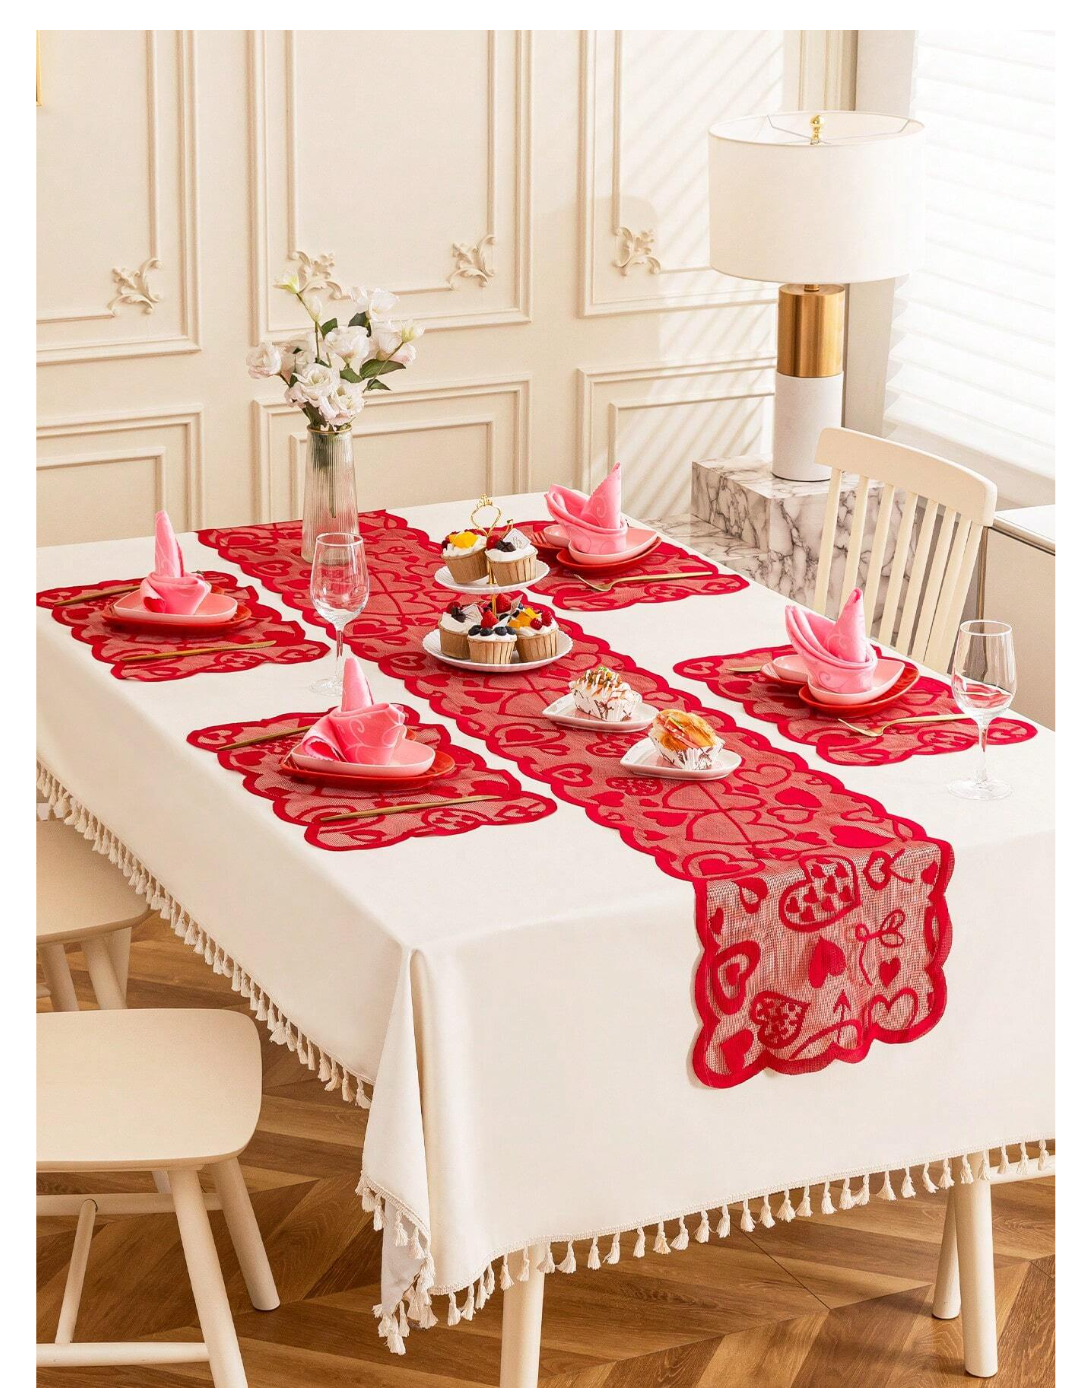 Heartstrings Harmony: Lace of Love 1pc Valentine's Day Table Runner – Basic Living Elegance for Weddings, Anniversaries, and Sweetest Day Celebrations!